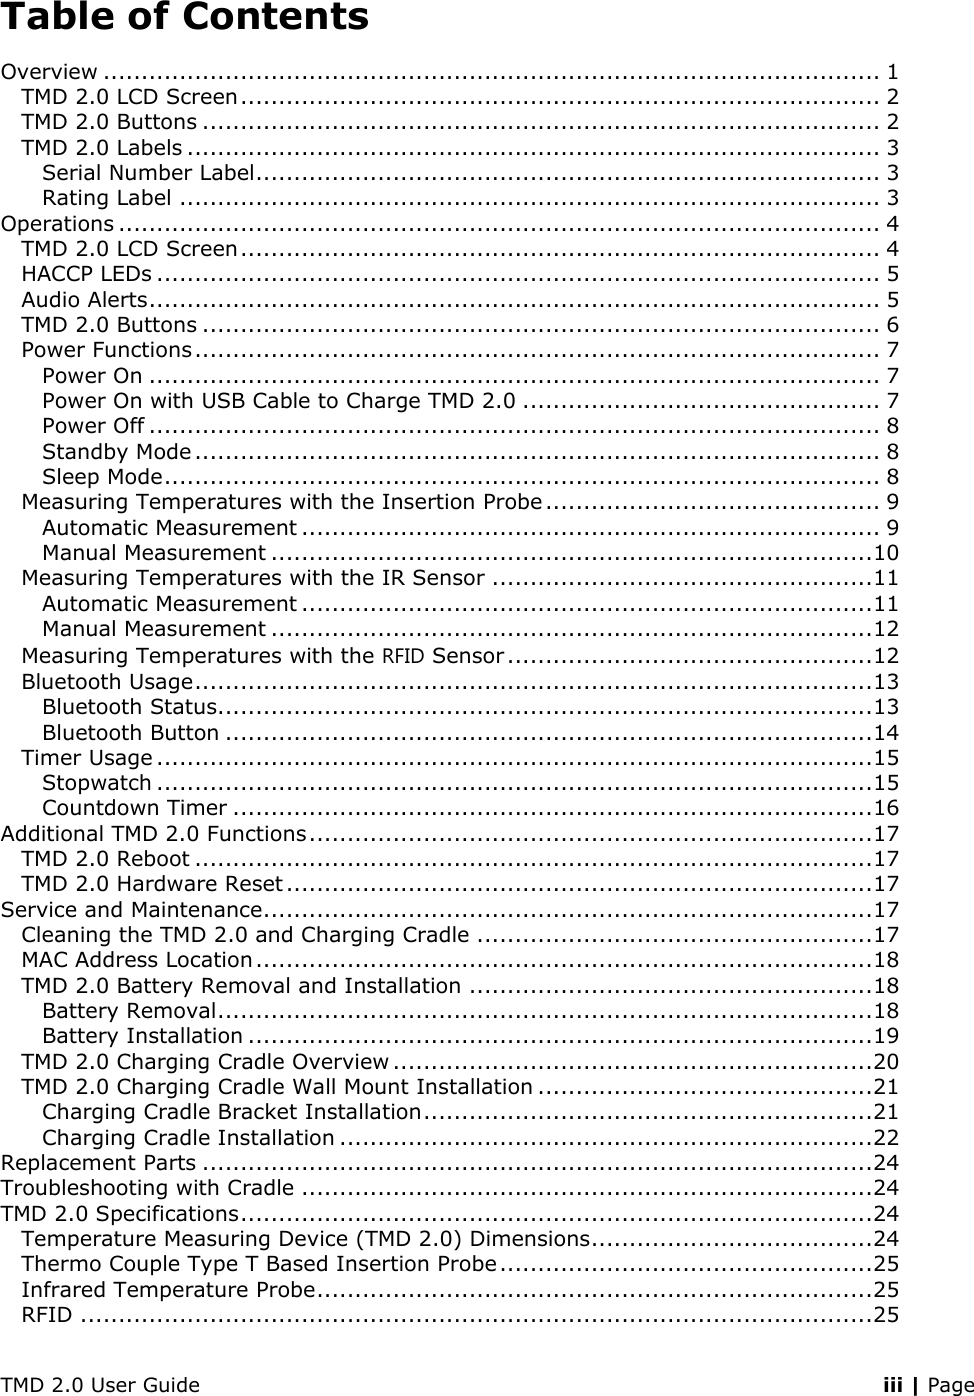 TMD 2.0 User Guide    iii | Page Table of Contents Overview ...................................................................................................... 1 TMD 2.0 LCD Screen .................................................................................... 2 TMD 2.0 Buttons ......................................................................................... 2 TMD 2.0 Labels ........................................................................................... 3 Serial Number Label .................................................................................. 3 Rating Label ............................................................................................ 3 Operations .................................................................................................... 4 TMD 2.0 LCD Screen .................................................................................... 4 HACCP LEDs ............................................................................................... 5 Audio Alerts ................................................................................................ 5 TMD 2.0 Buttons ......................................................................................... 6 Power Functions .......................................................................................... 7 Power On ................................................................................................ 7 Power On with USB Cable to Charge TMD 2.0 ............................................... 7 Power Off ................................................................................................ 8 Standby Mode .......................................................................................... 8 Sleep Mode .............................................................................................. 8 Measuring Temperatures with the Insertion Probe ............................................ 9 Automatic Measurement ............................................................................ 9 Manual Measurement ............................................................................... 10 Measuring Temperatures with the IR Sensor .................................................. 11 Automatic Measurement ........................................................................... 11 Manual Measurement ............................................................................... 12 Measuring Temperatures with the RFID Sensor ................................................ 12 Bluetooth Usage ......................................................................................... 13 Bluetooth Status...................................................................................... 13 Bluetooth Button ..................................................................................... 14 Timer Usage .............................................................................................. 15 Stopwatch .............................................................................................. 15 Countdown Timer .................................................................................... 16 Additional TMD 2.0 Functions .......................................................................... 17 TMD 2.0 Reboot ......................................................................................... 17 TMD 2.0 Hardware Reset ............................................................................. 17 Service and Maintenance ................................................................................ 17 Cleaning the TMD 2.0 and Charging Cradle .................................................... 17 MAC Address Location ................................................................................. 18 TMD 2.0 Battery Removal and Installation ..................................................... 18 Battery Removal ...................................................................................... 18 Battery Installation .................................................................................. 19 TMD 2.0 Charging Cradle Overview ............................................................... 20 TMD 2.0 Charging Cradle Wall Mount Installation ............................................ 21 Charging Cradle Bracket Installation ........................................................... 21 Charging Cradle Installation ...................................................................... 22 Replacement Parts ........................................................................................ 24 Troubleshooting with Cradle ........................................................................... 24 TMD 2.0 Specifications ................................................................................... 24 Temperature Measuring Device (TMD 2.0) Dimensions ..................................... 24 Thermo Couple Type T Based Insertion Probe ................................................. 25 Infrared Temperature Probe ......................................................................... 25 RFID ........................................................................................................ 25 